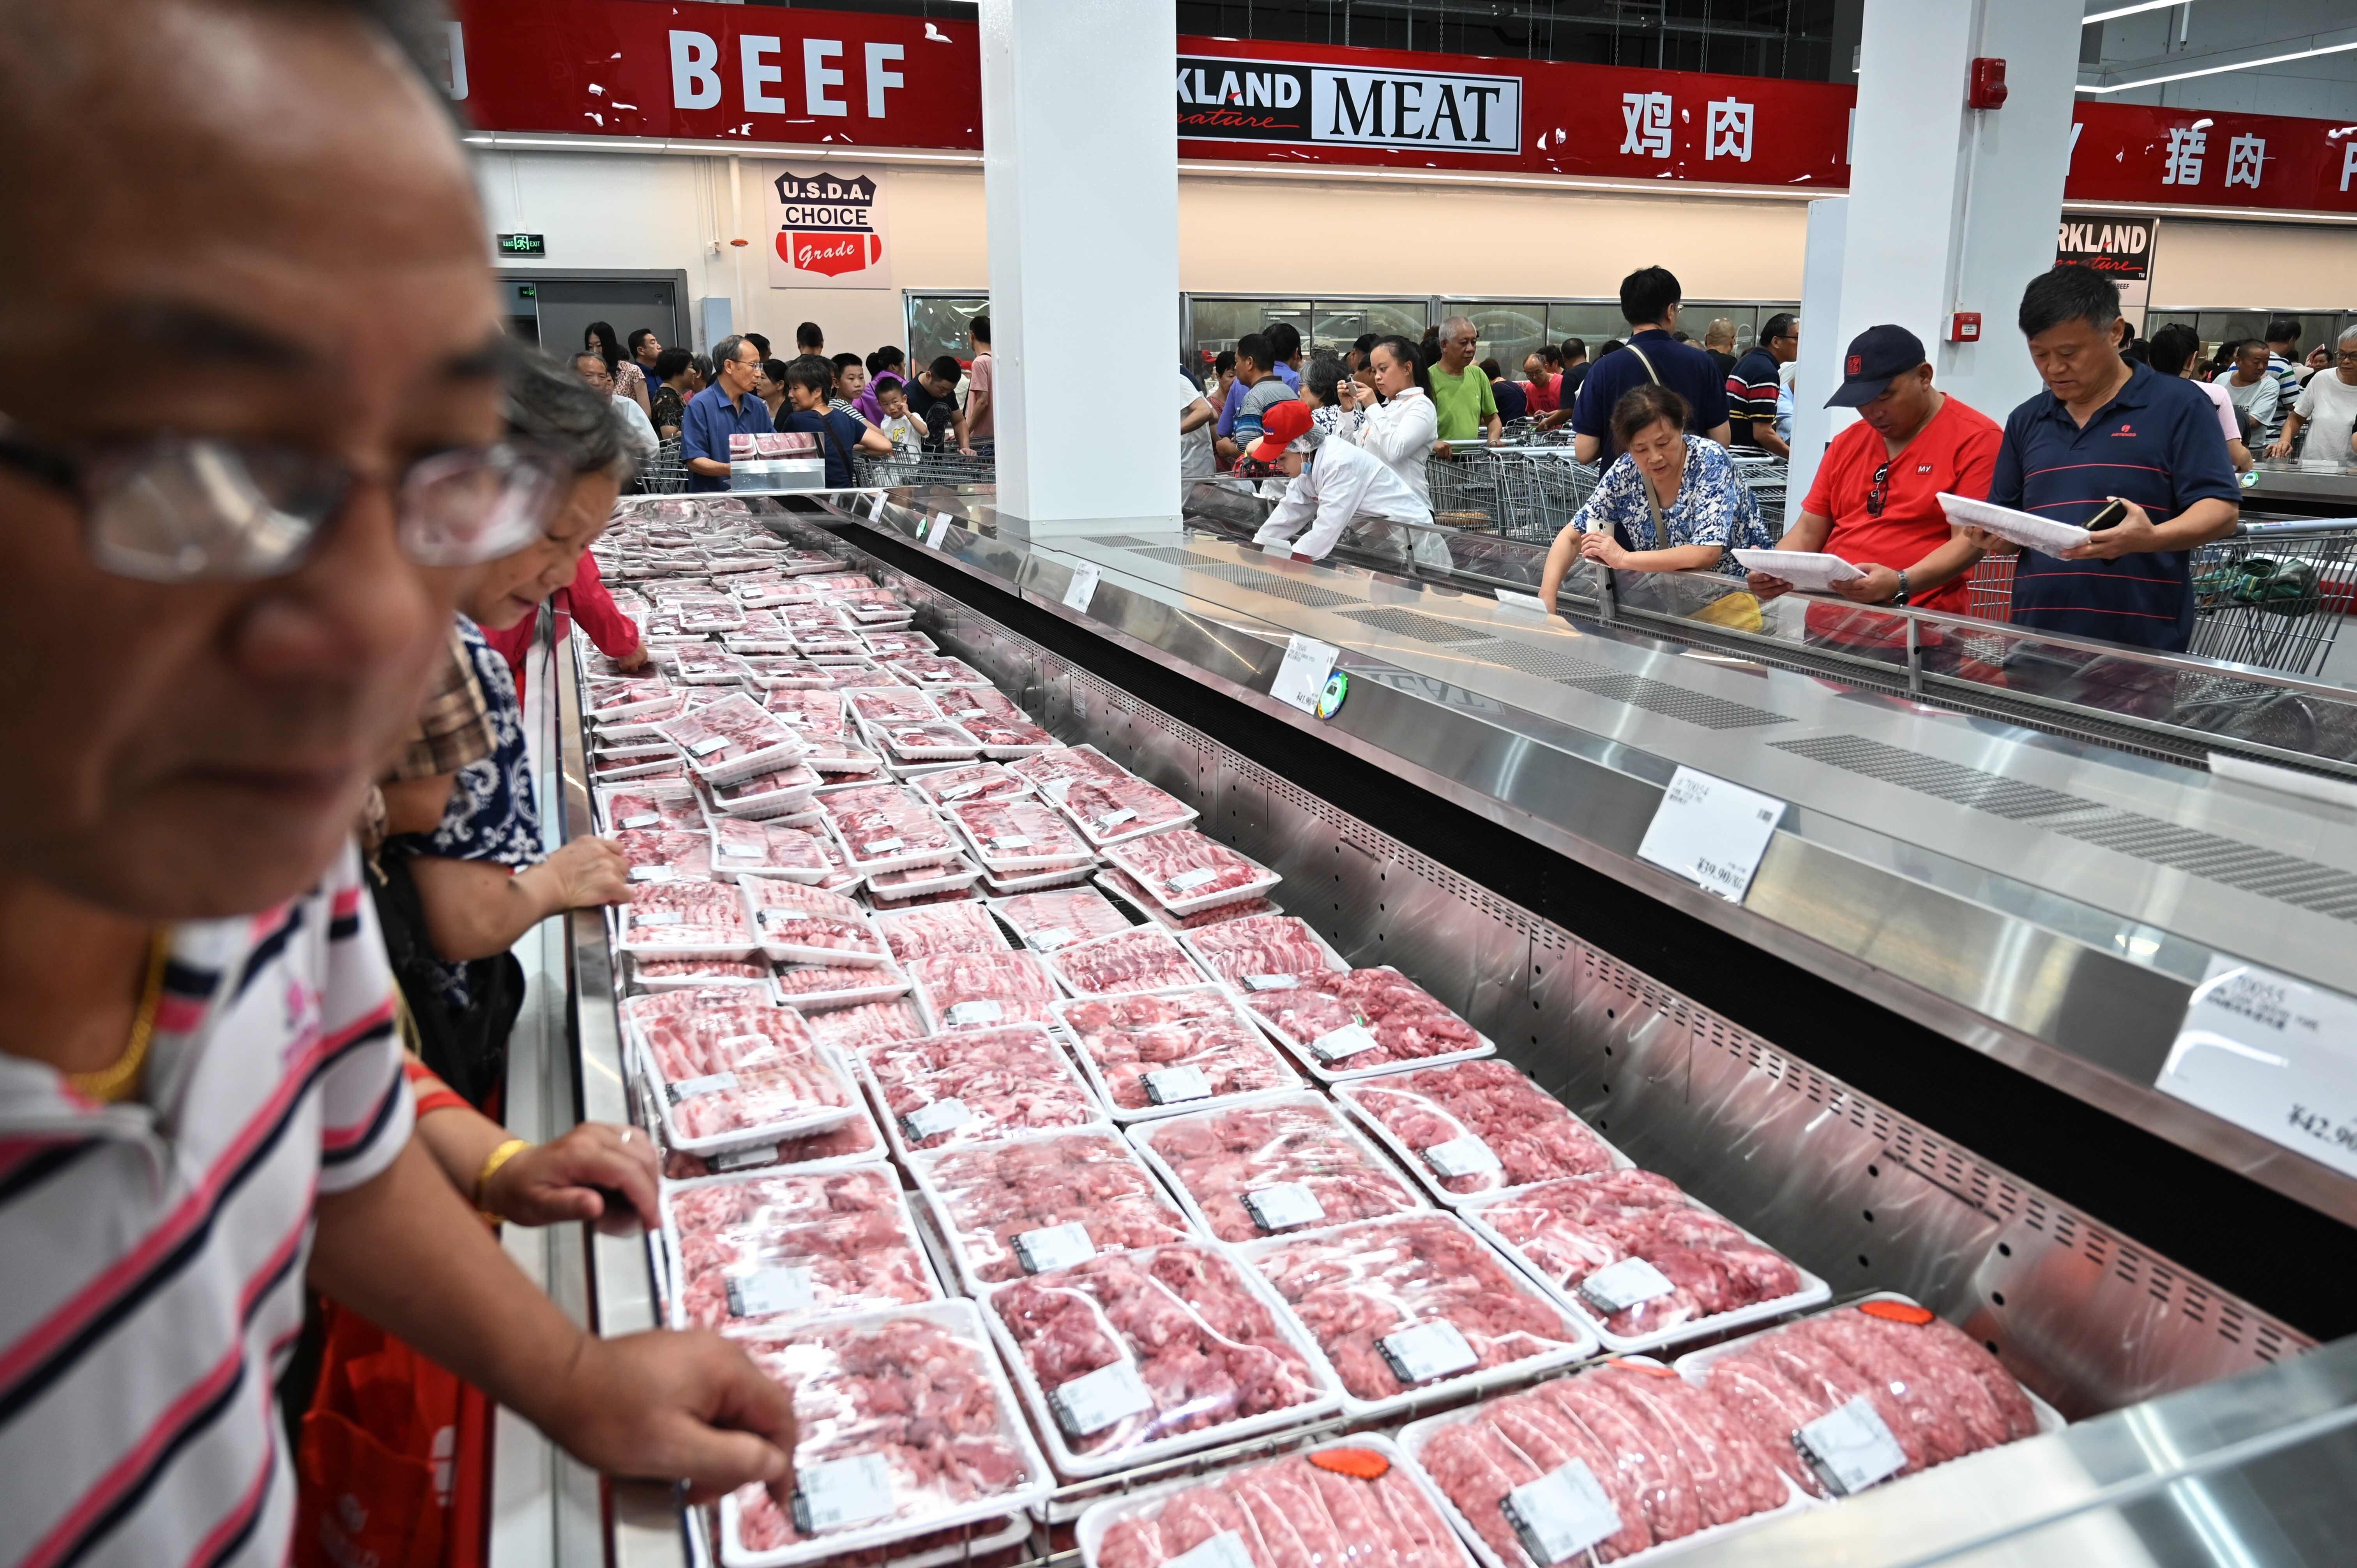 China agreed to import a record US$36.5 billion in US farm goods in the phase one trade deal signed in January, with pork expected to be key to reaching the mark. Photo: AFP